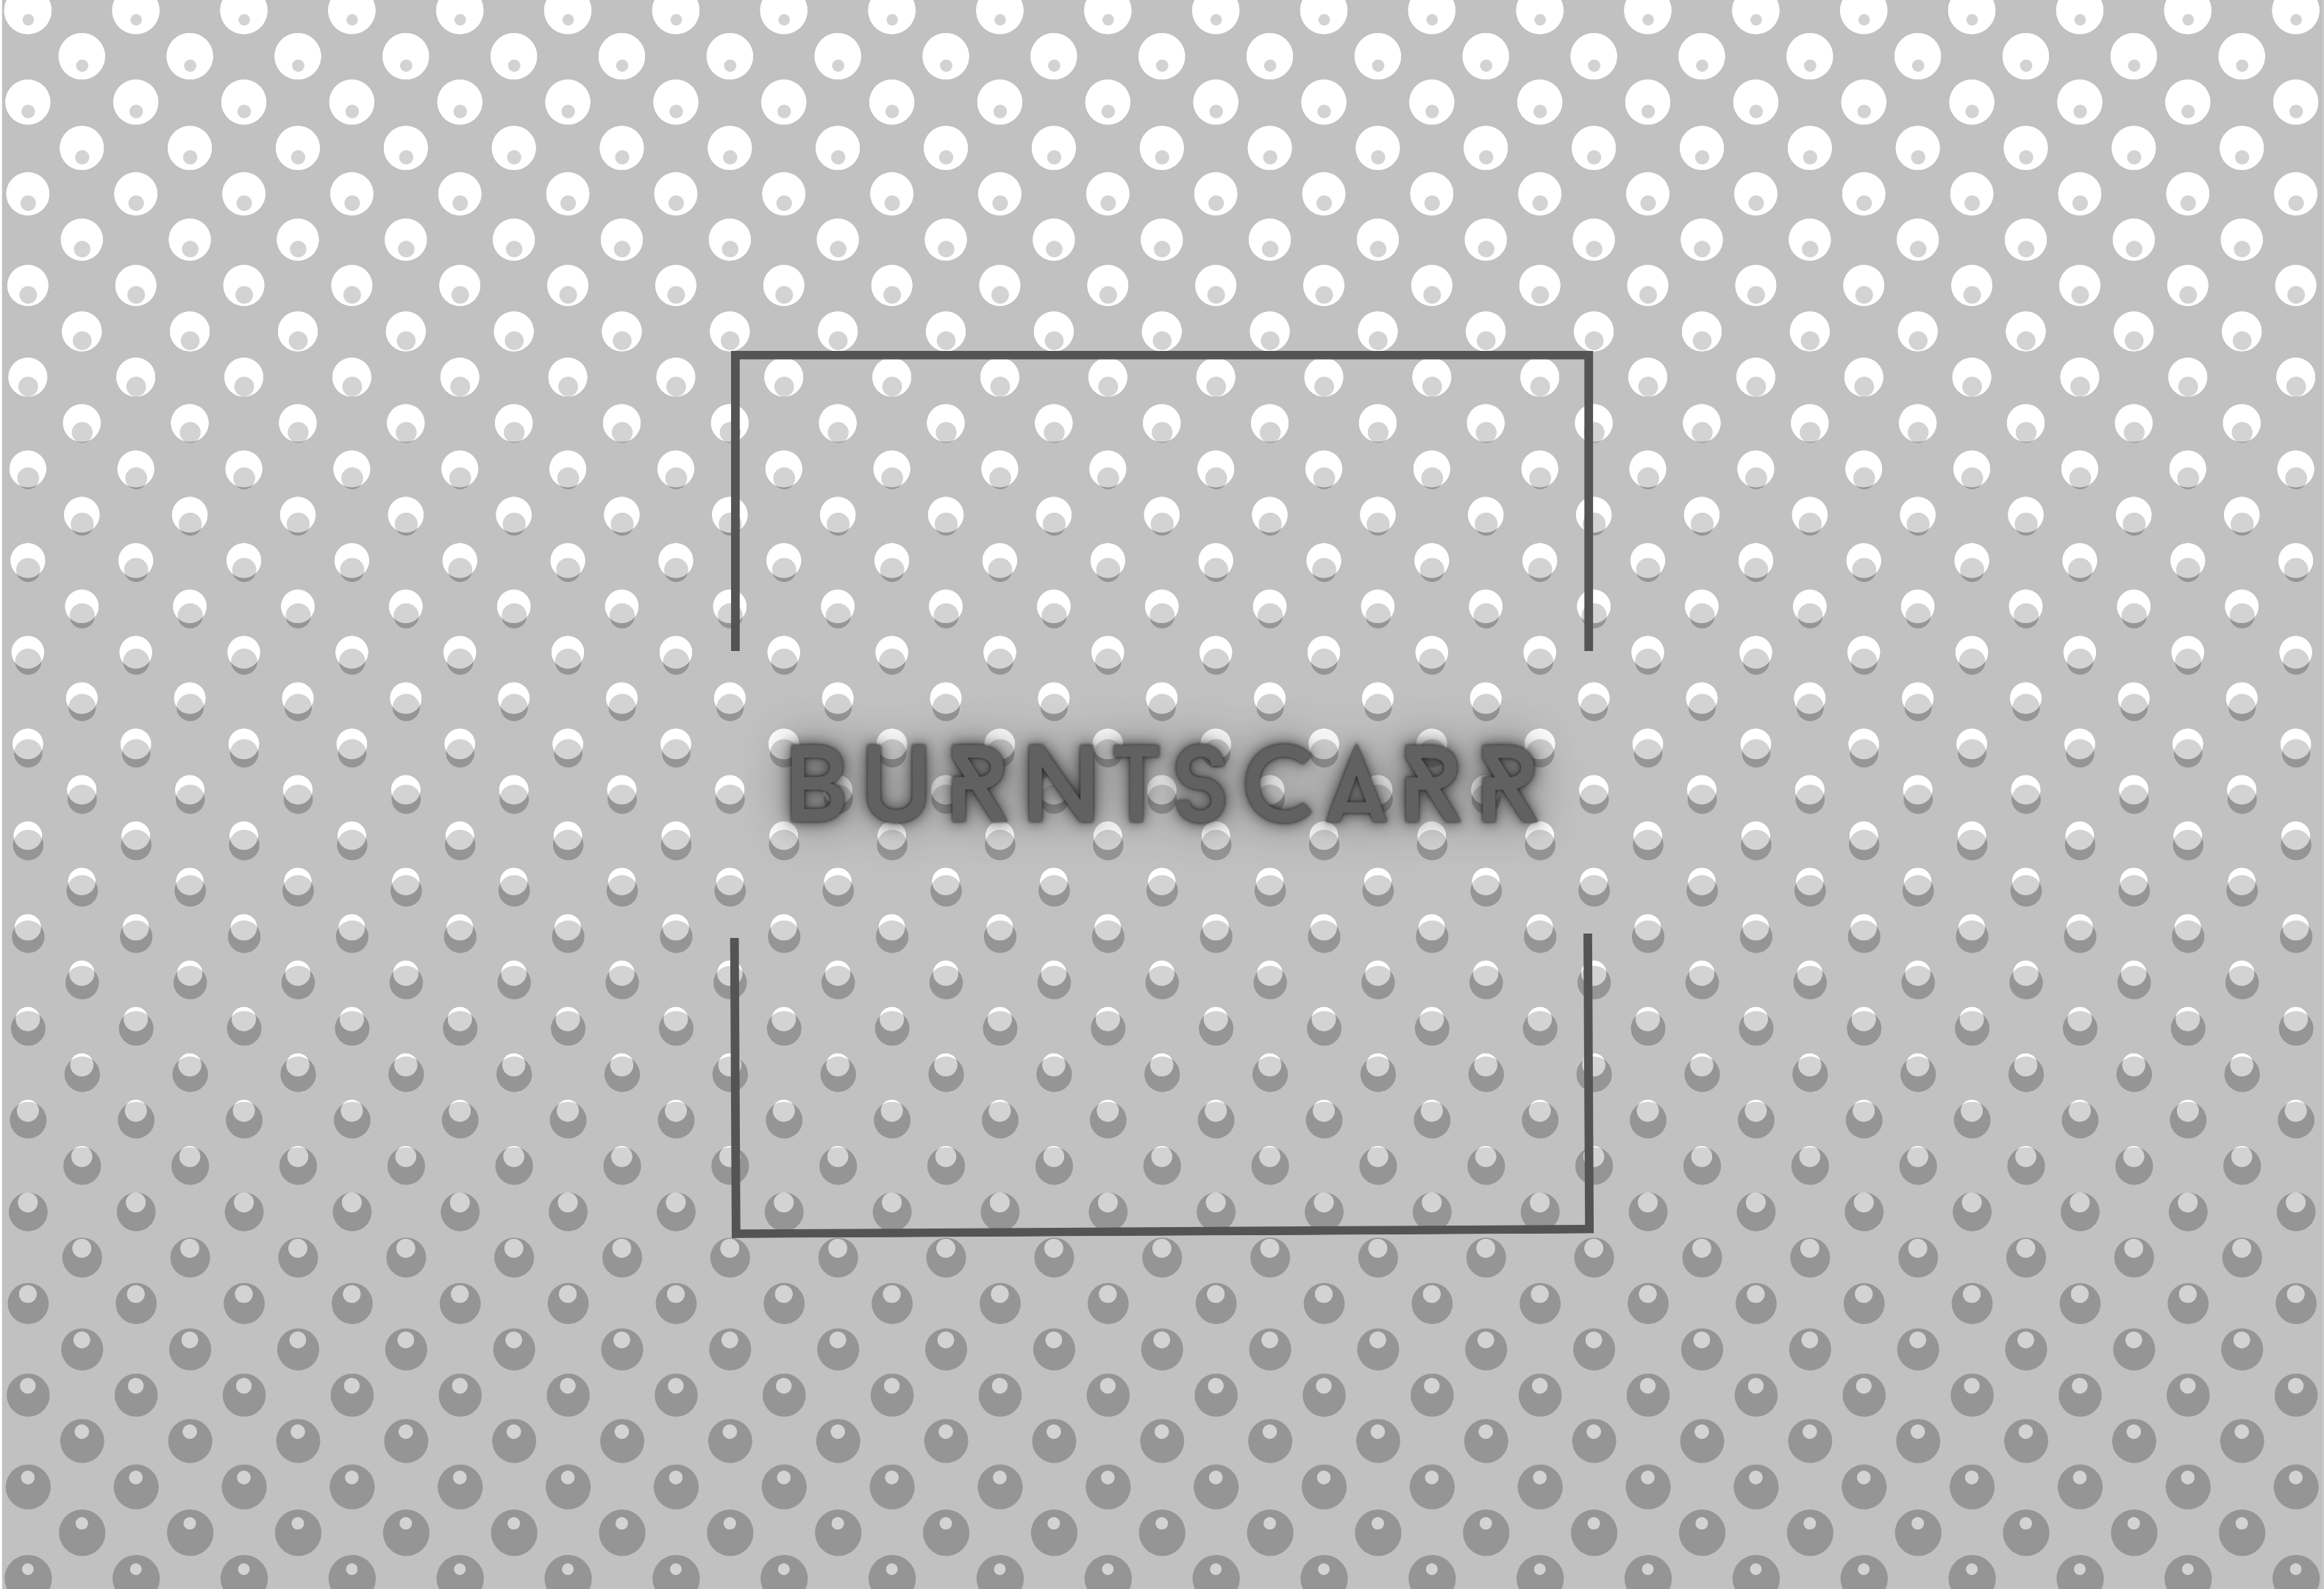 burntscarr - Welcome To The DMX Party